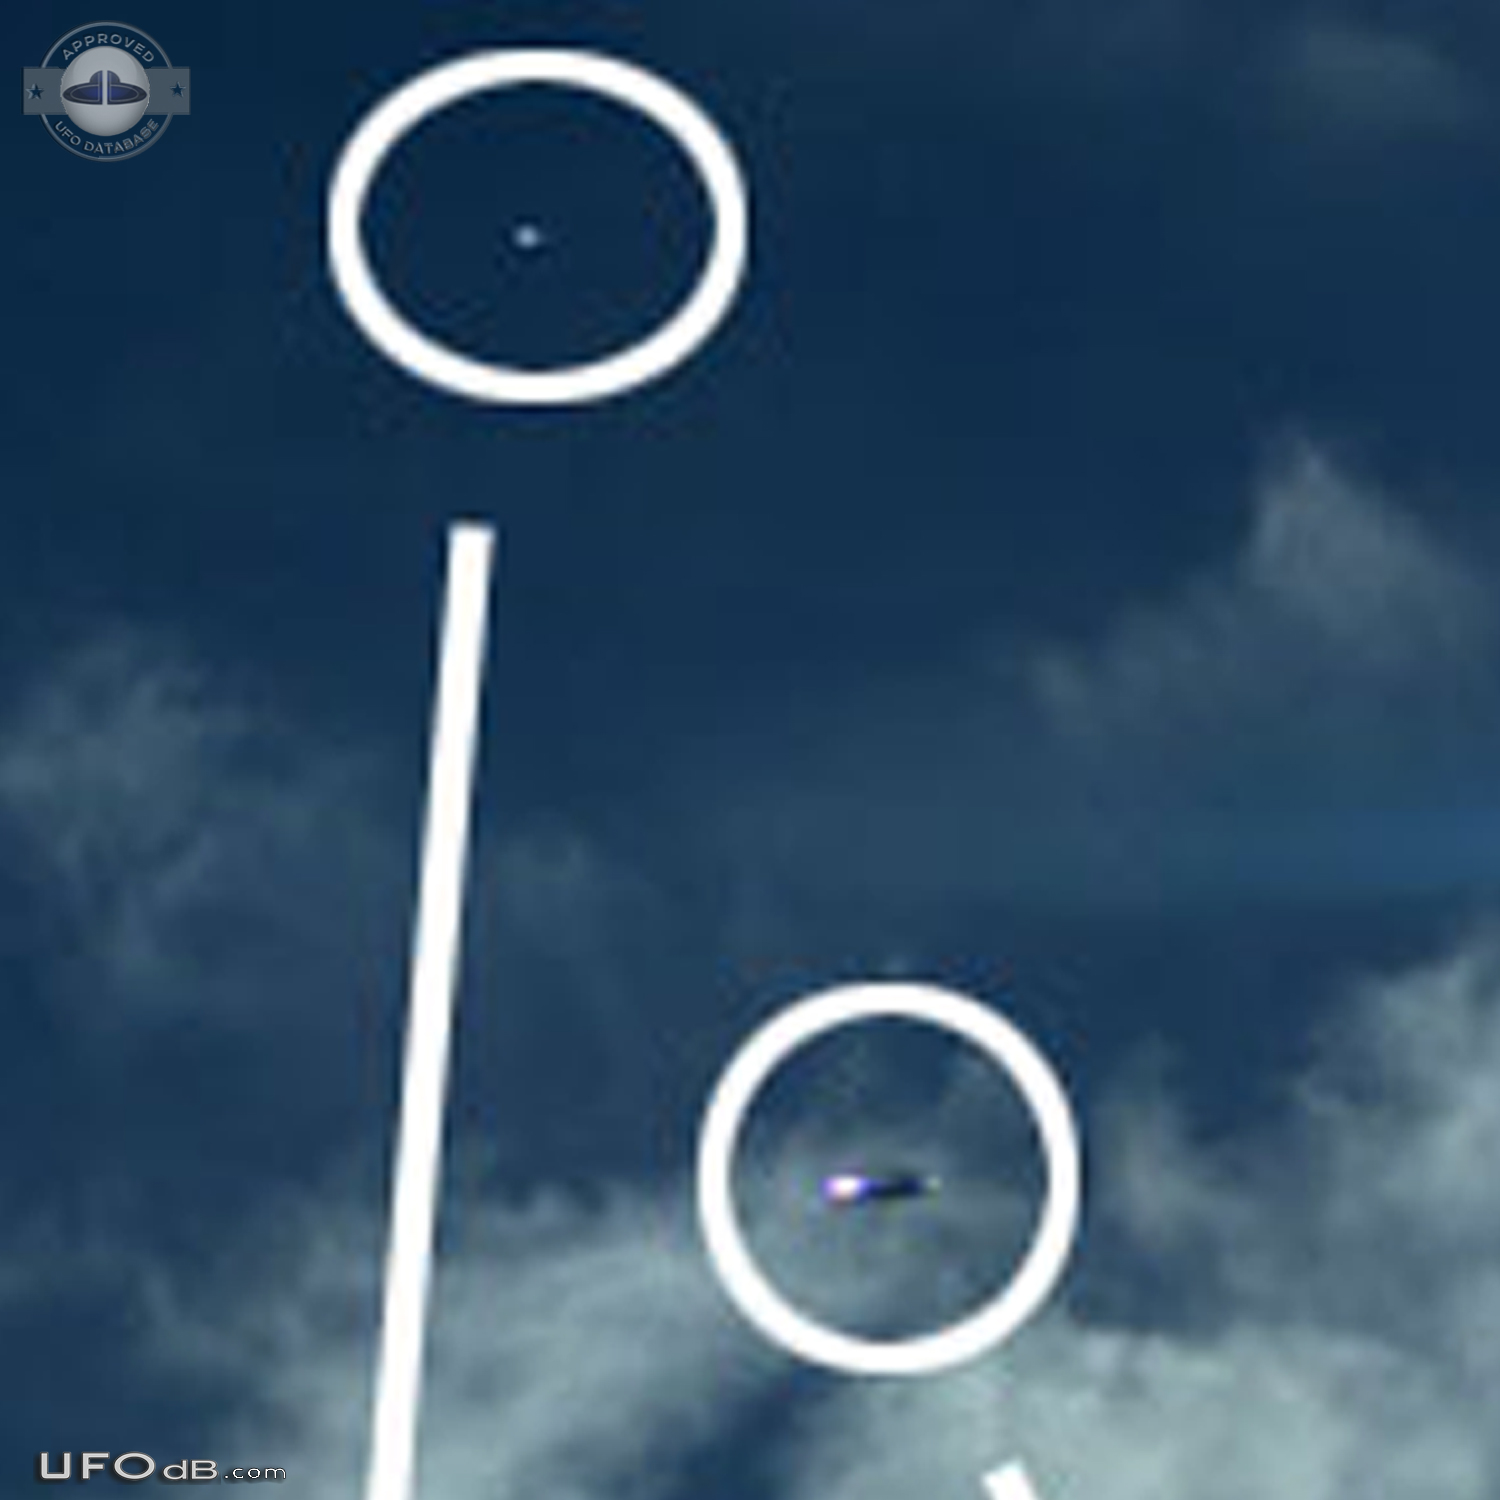 Trail Camera Captures UFOs in the Eastern Sky - Clancy Montana USA 201 UFO Picture #765-5